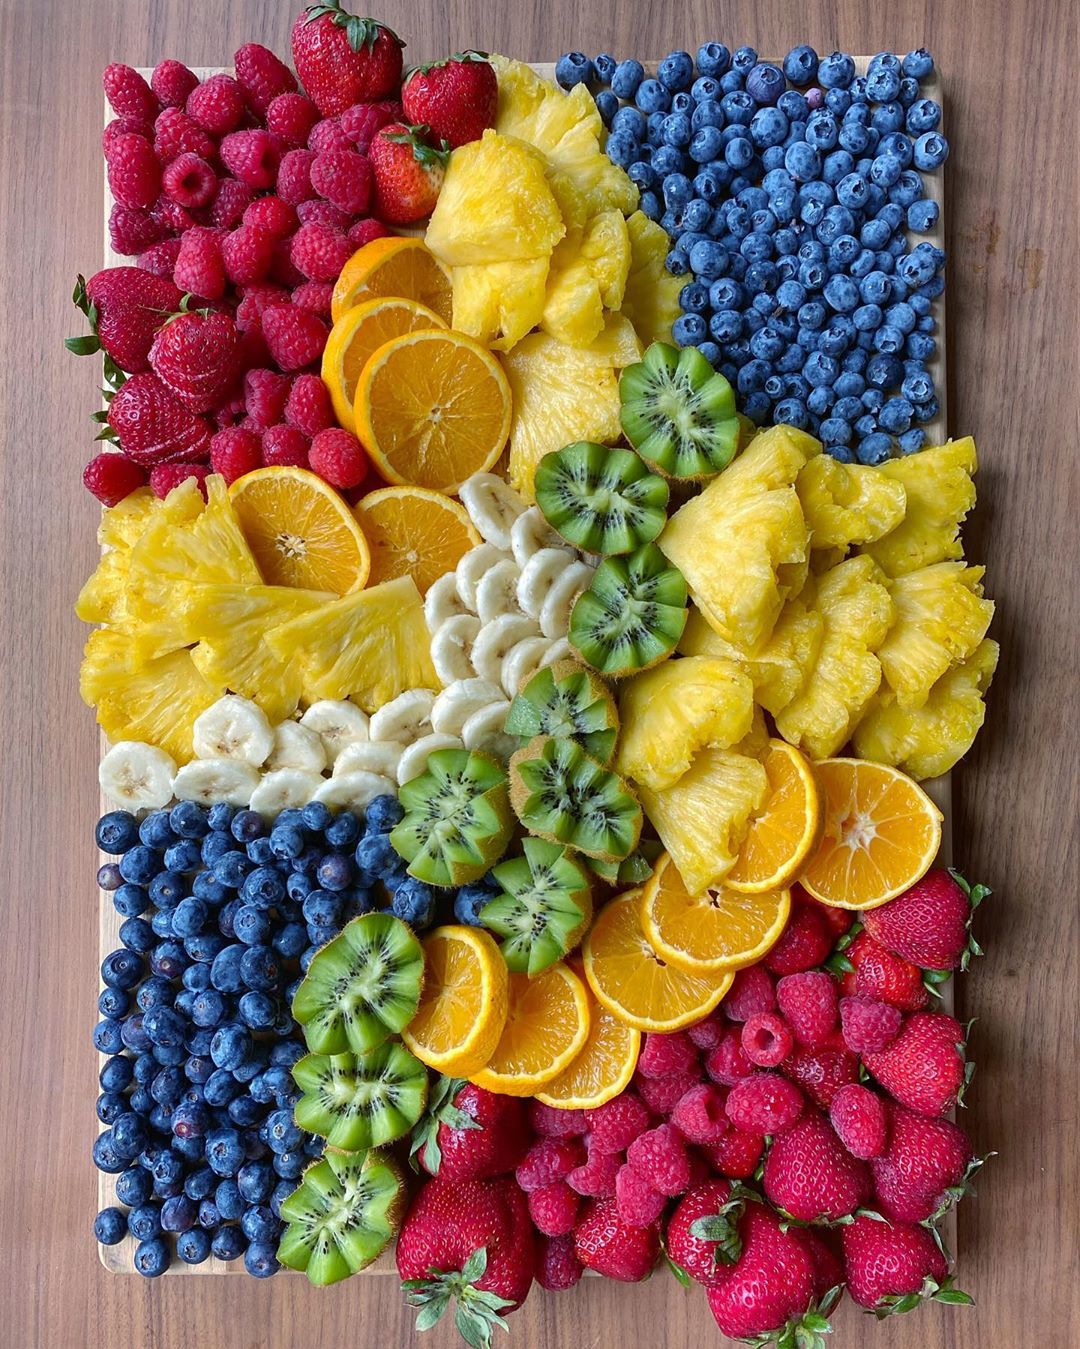 You can't even begin to handle this board of fruits.